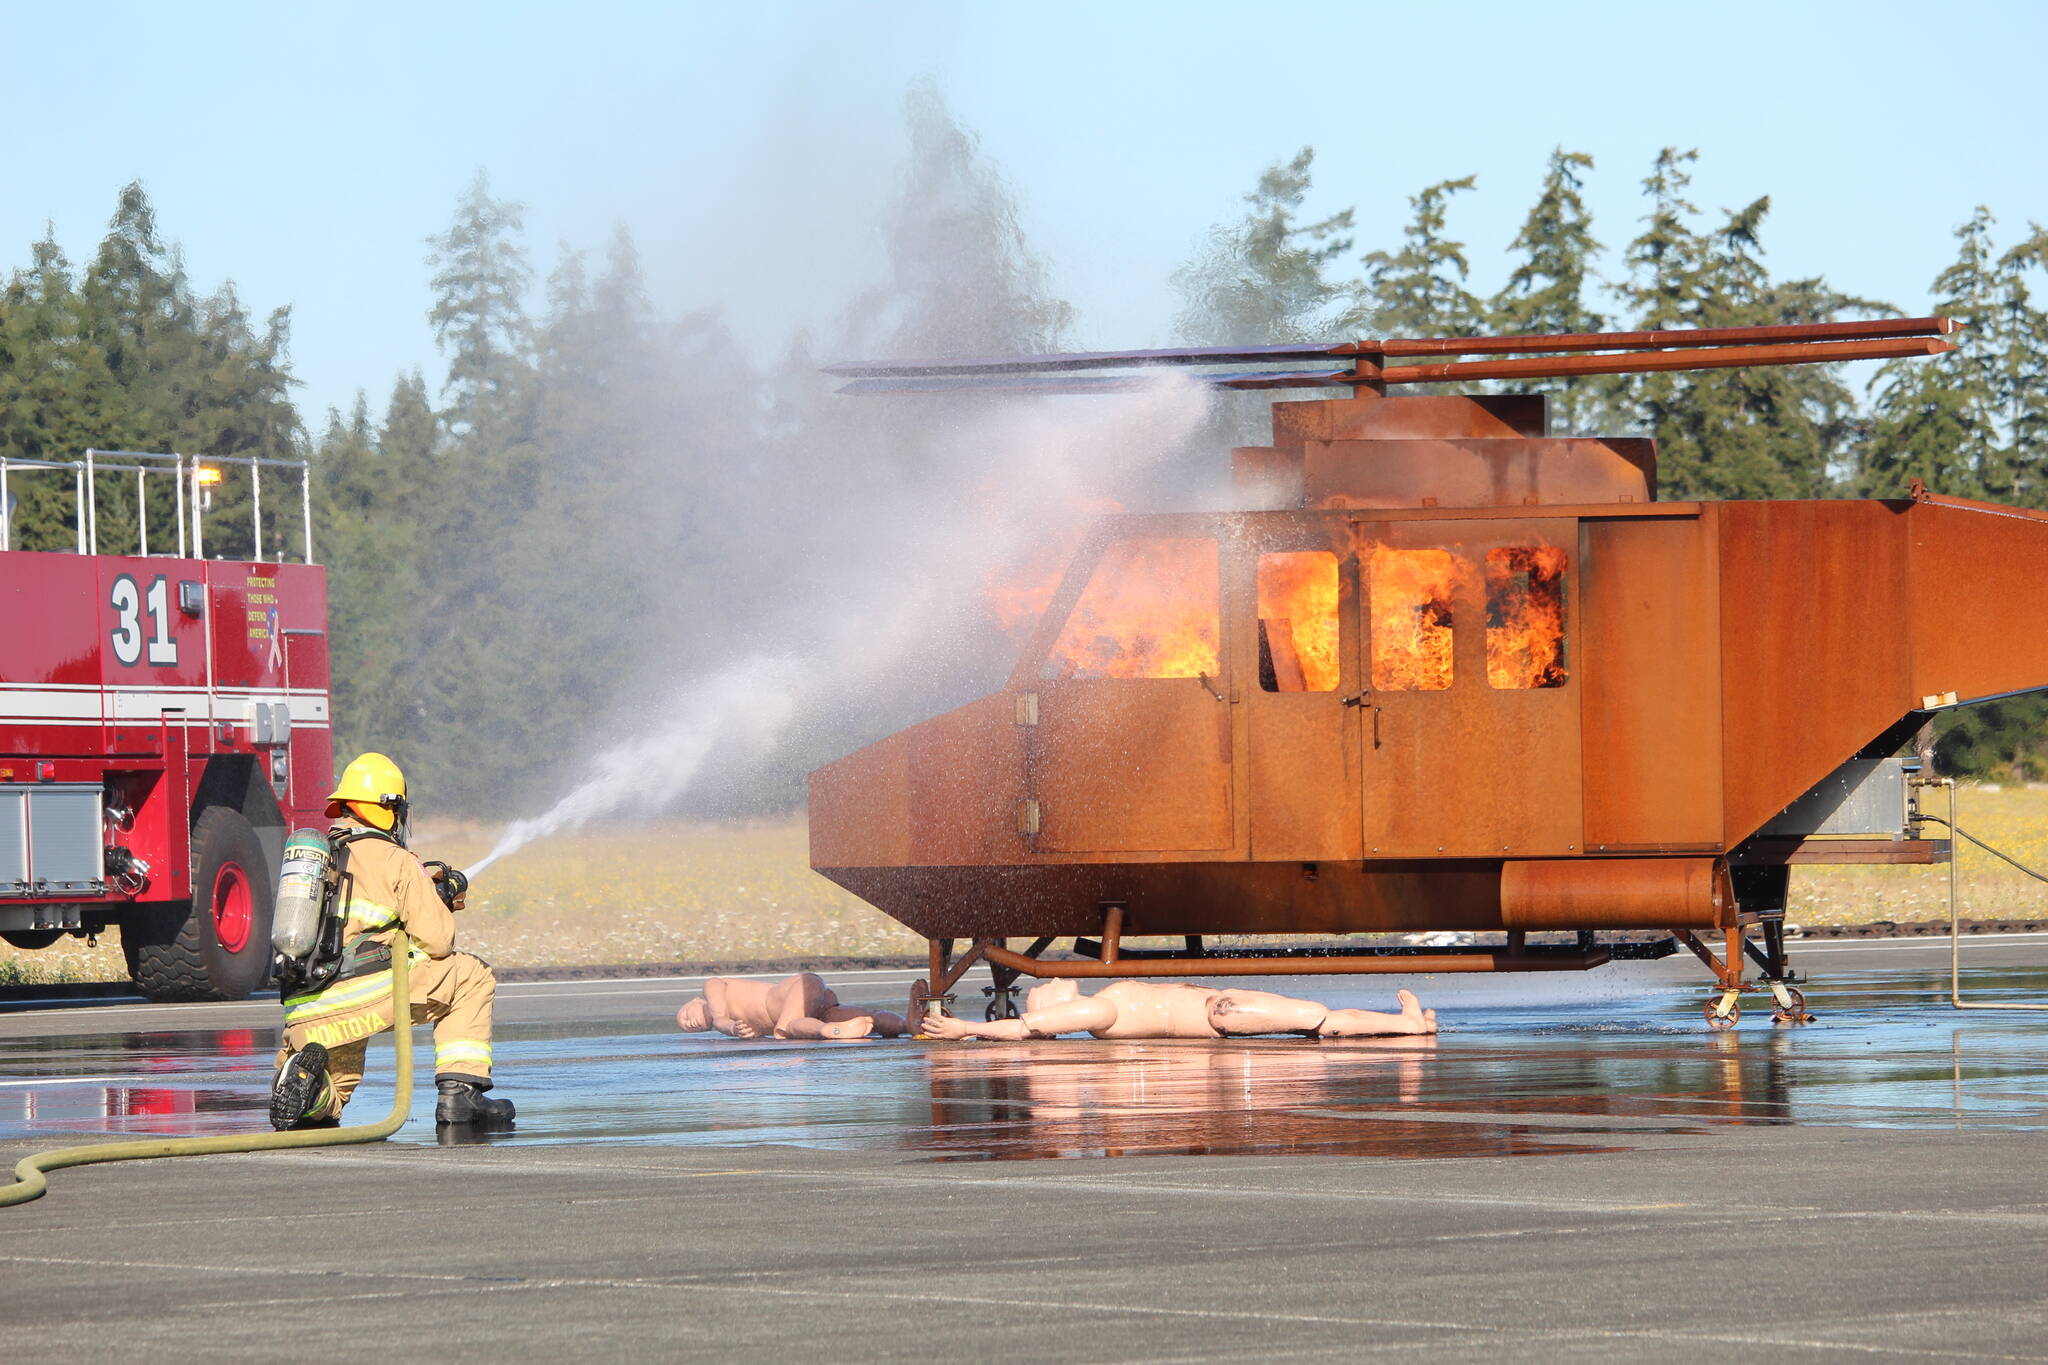 Photo by Karina Andrew/Whidbey News-Times
A Navy firefighter aims a hose at a helicopter fire during an emergency simulation at Outlying Field Coupeville Aug. 17.